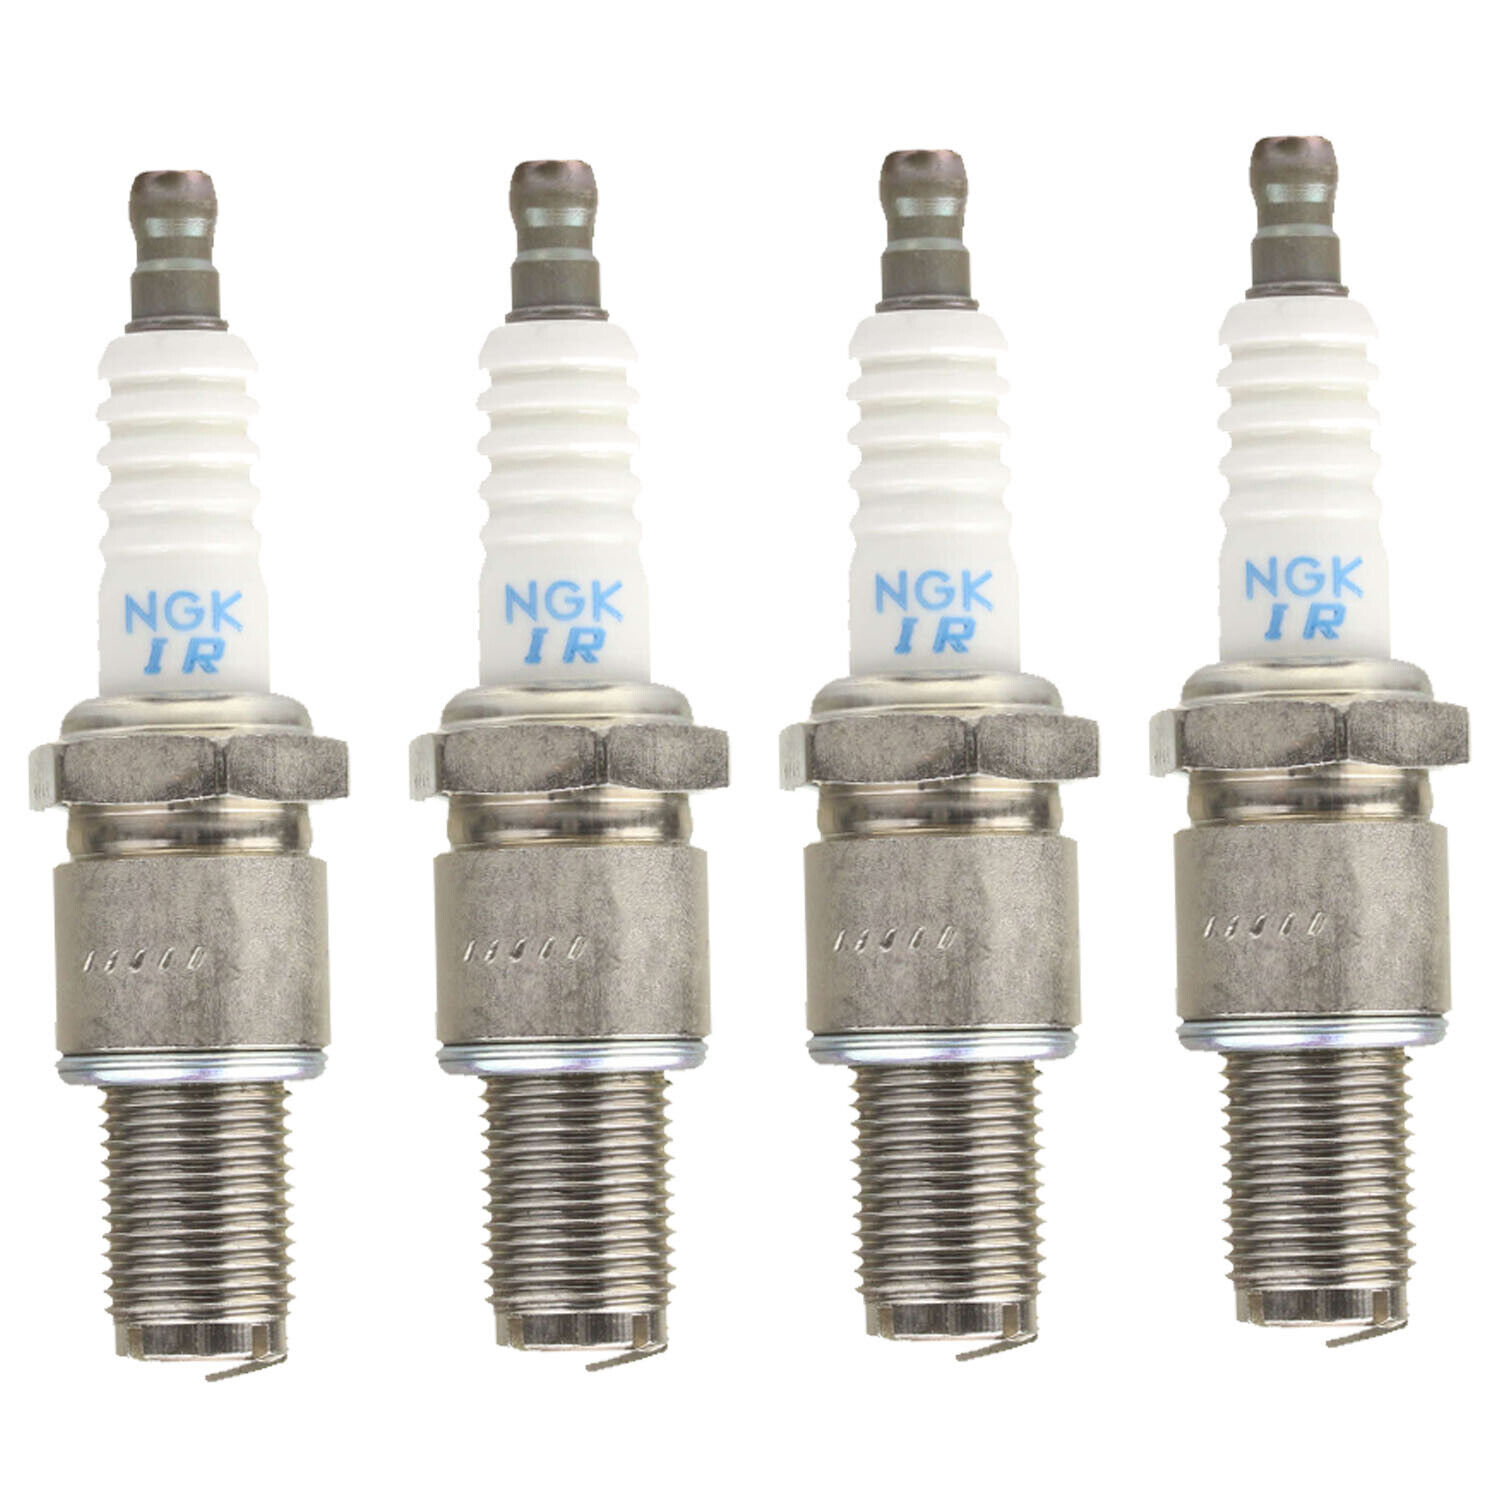 Set of 4 For Mazda RX 8 1.3 2004-2011 Spark Plugs NGK Laser Iridium RE7CL/6700